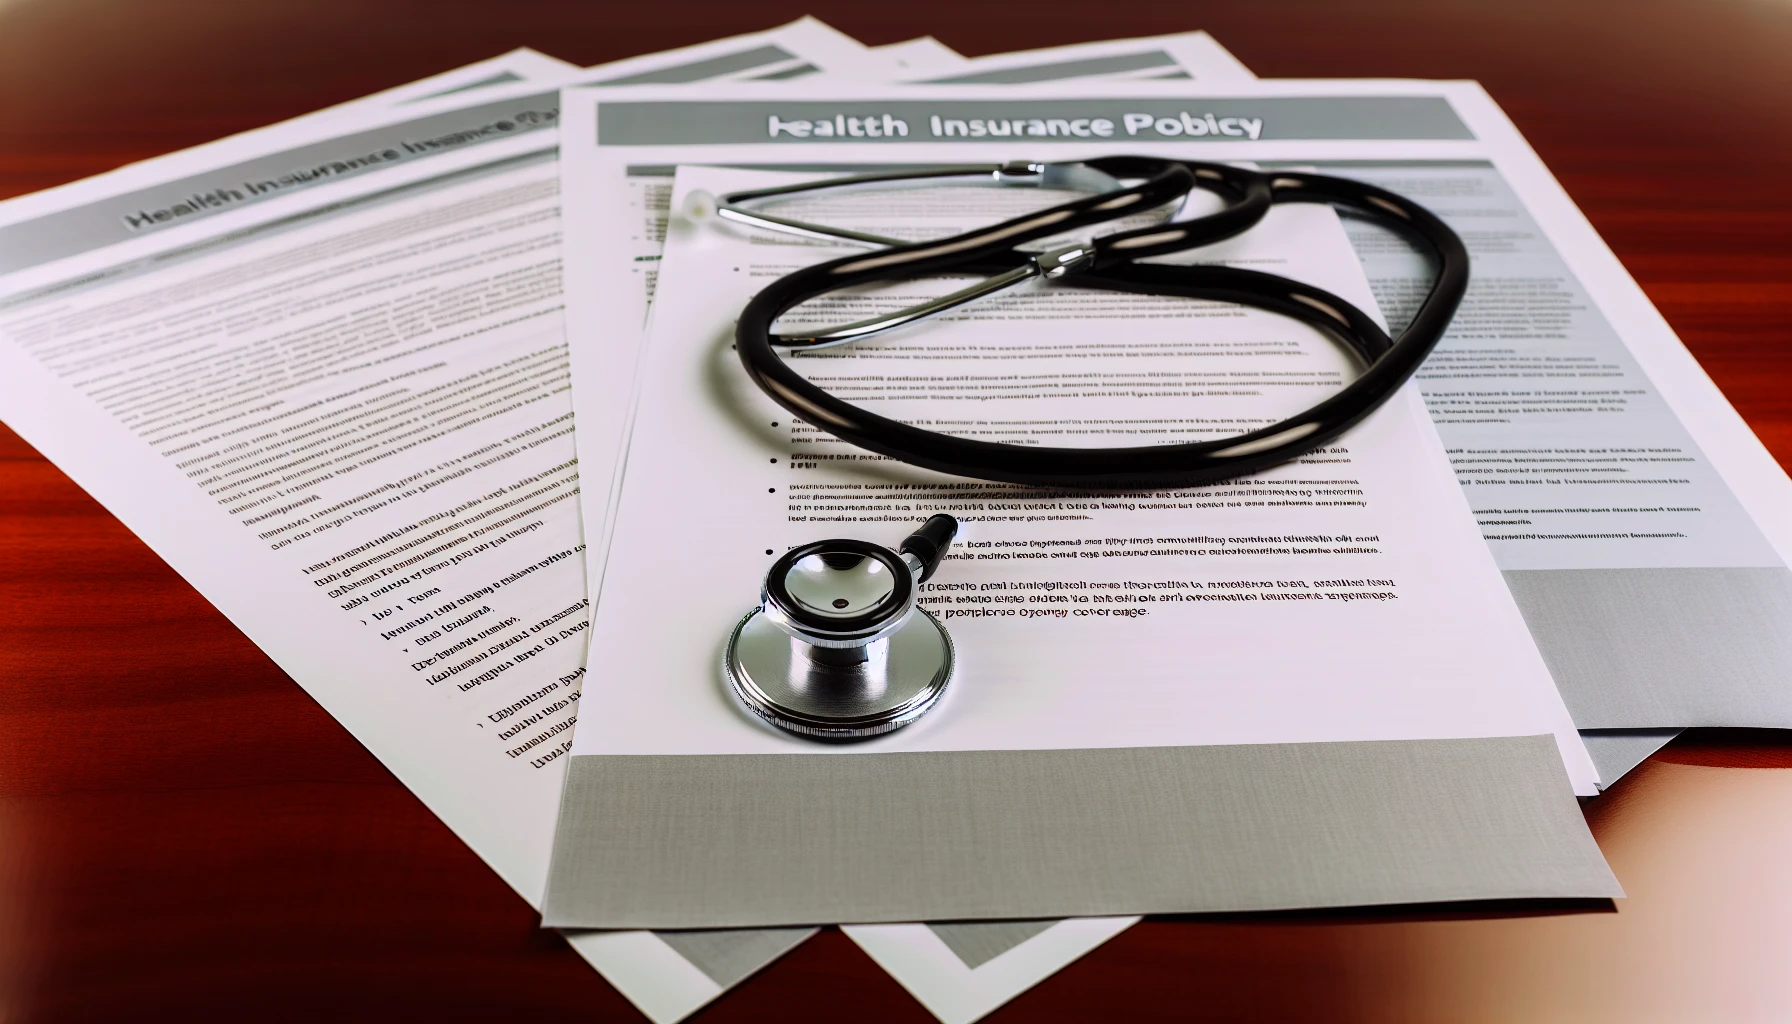 Health insurance policy documents with a stethoscope on a desk